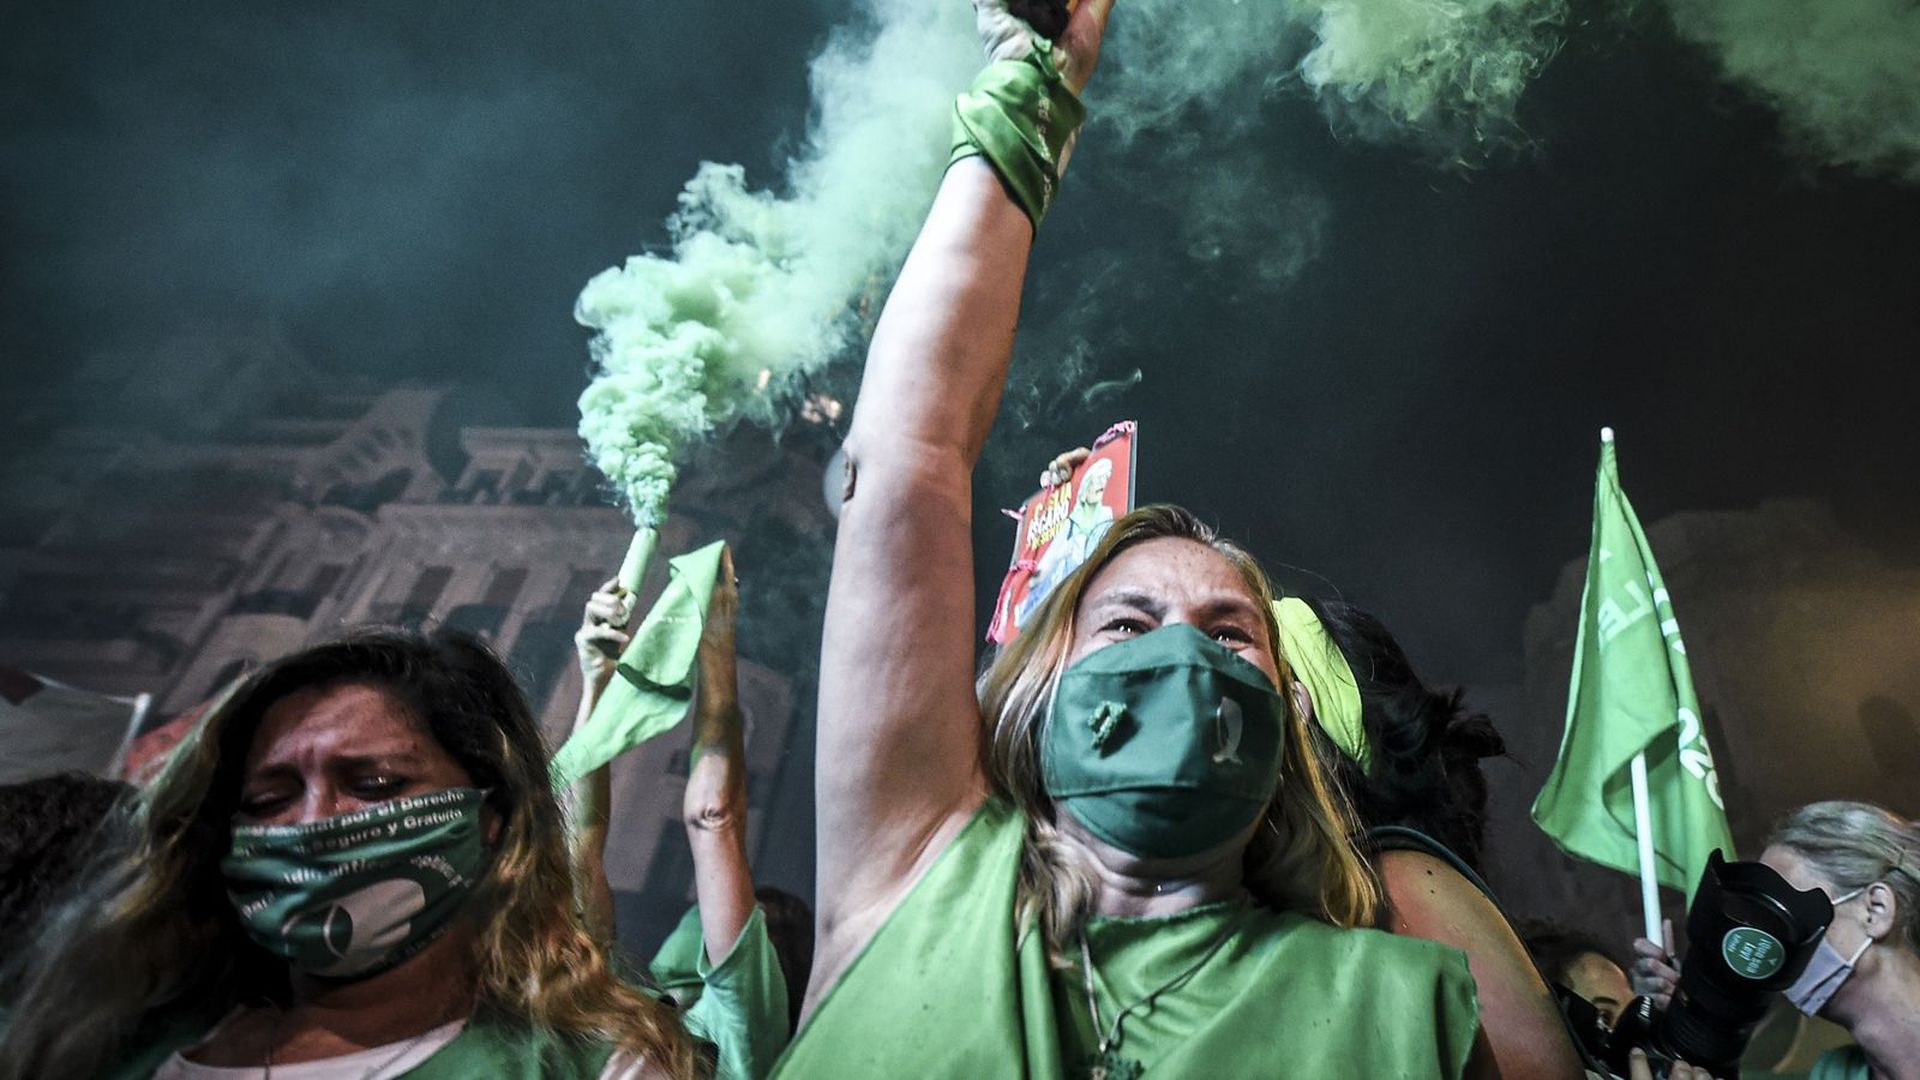 women dressed in all green clothing and wearing green masks celebrate the legalization of abortion in Argentina, waving sticks that emit green smoke in the air 